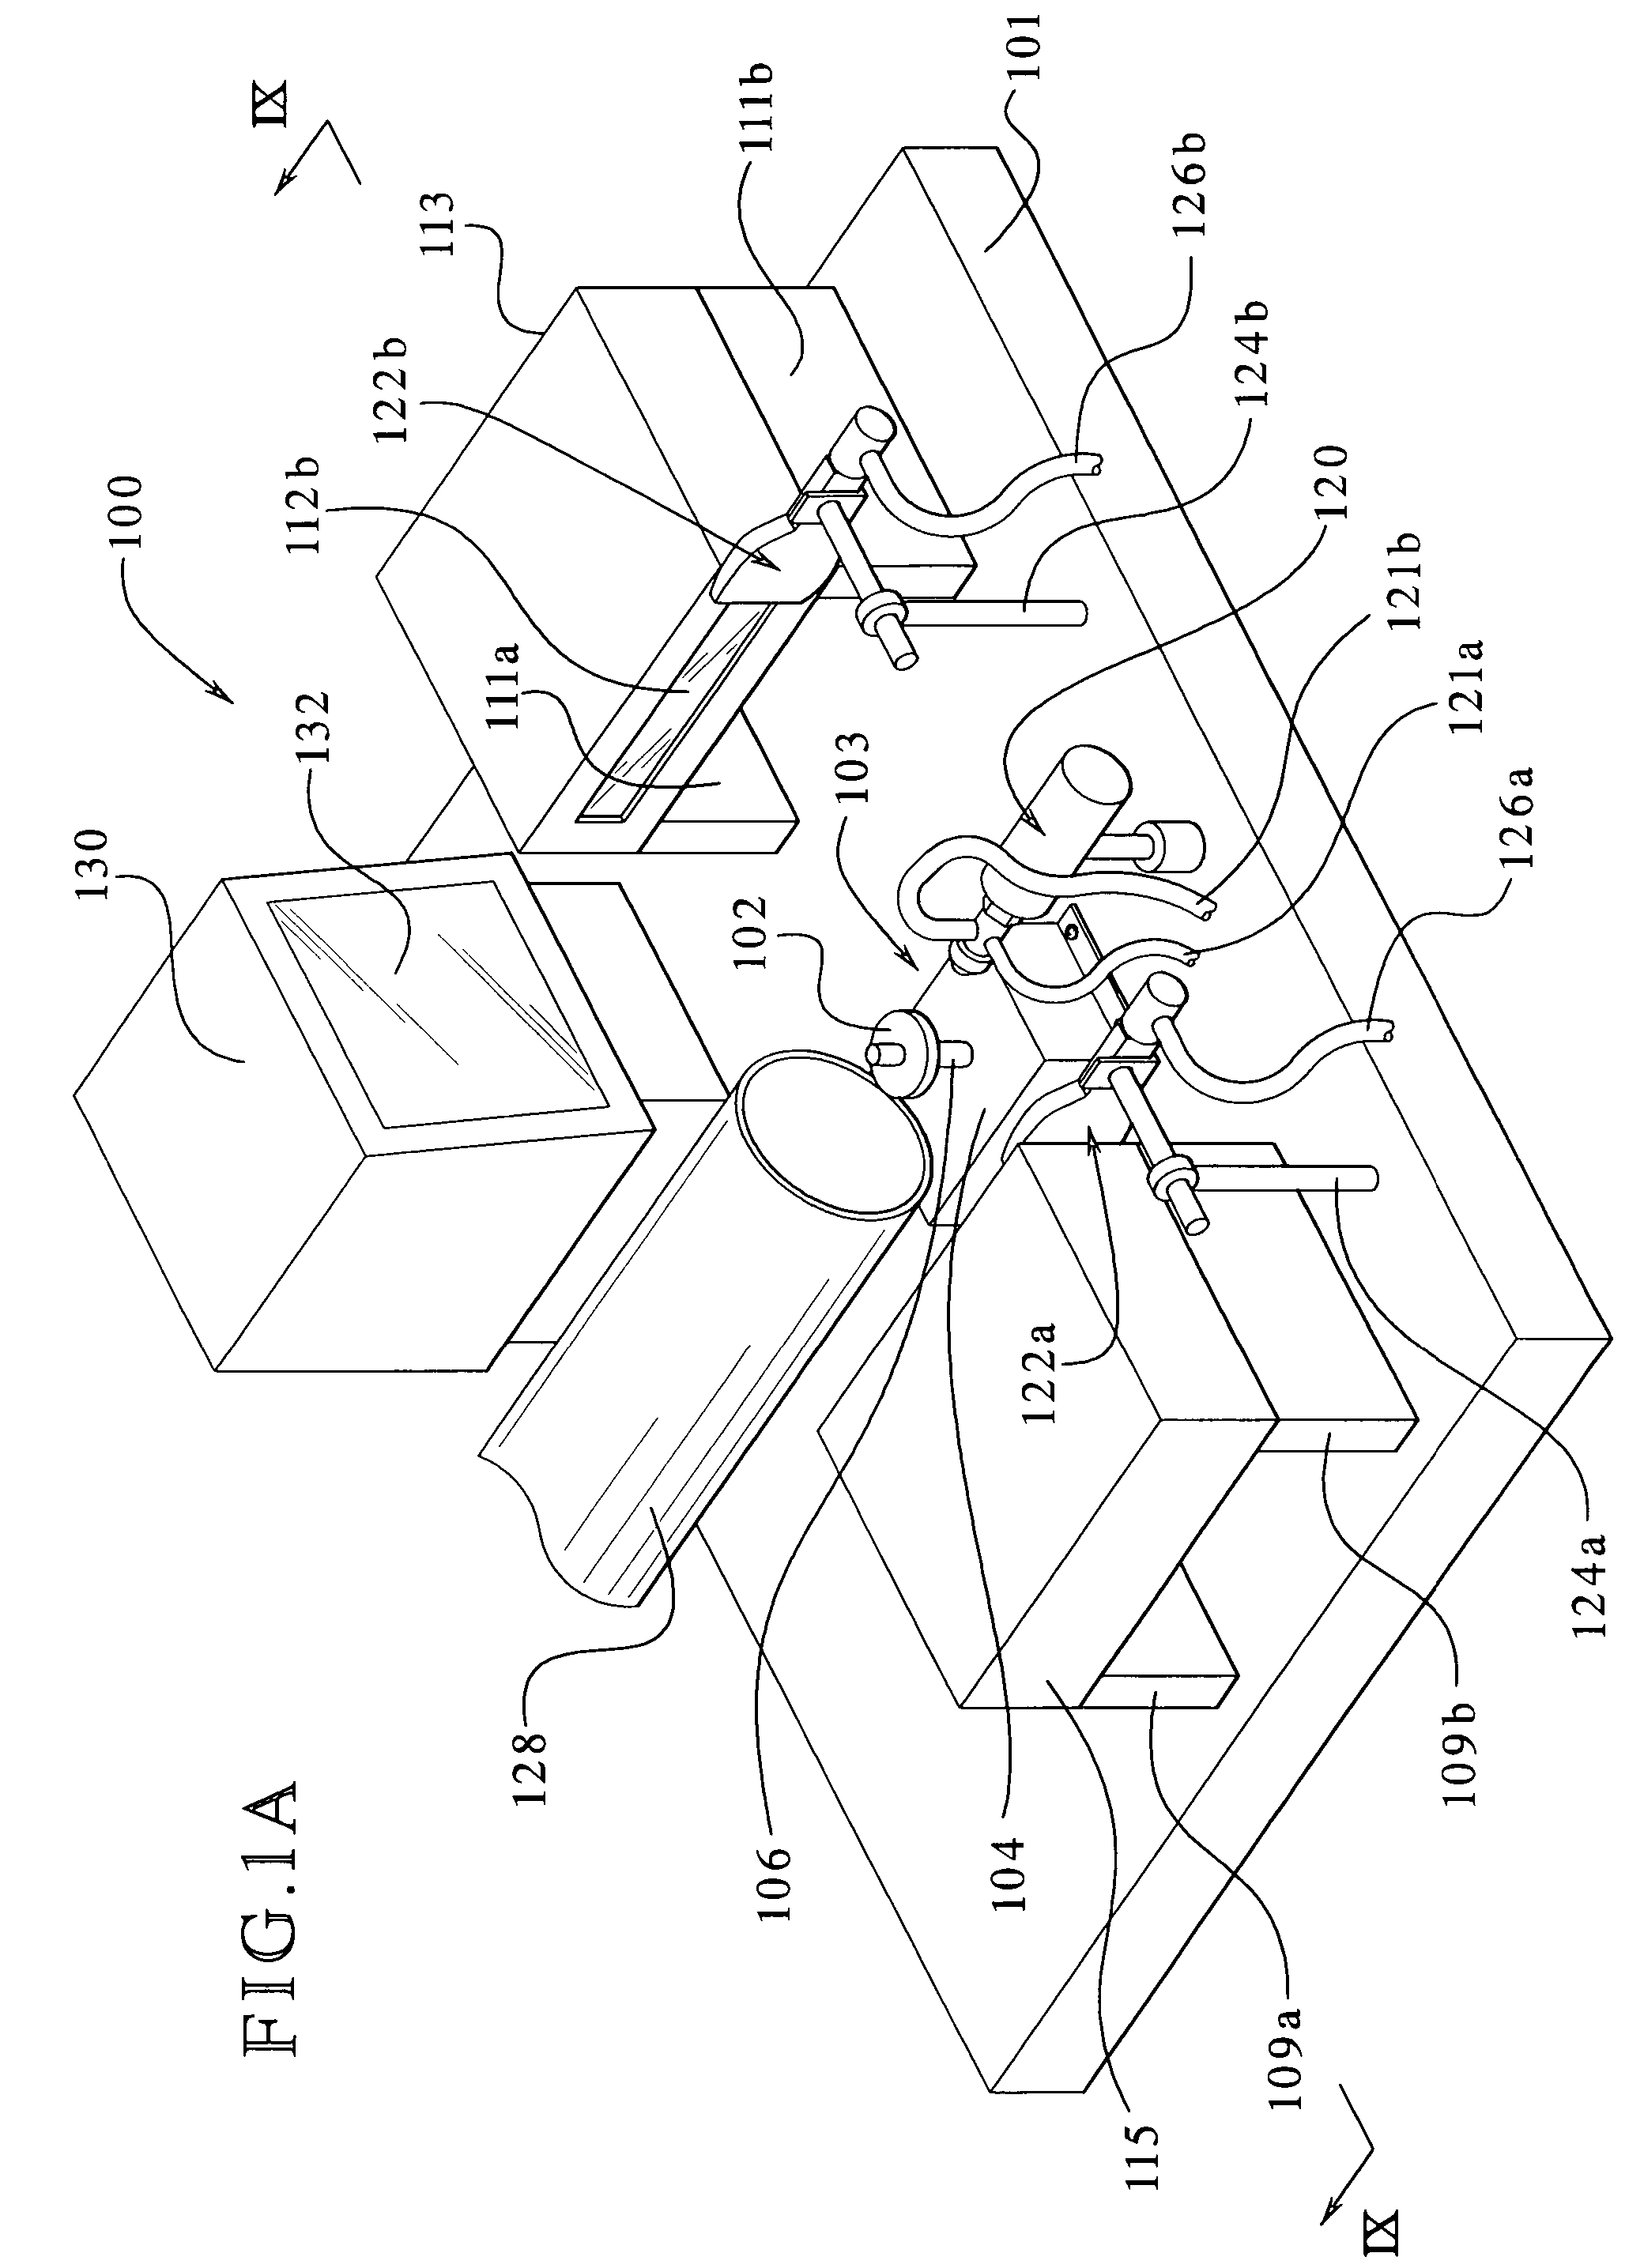 Method for simultaneously coating and measuring parts